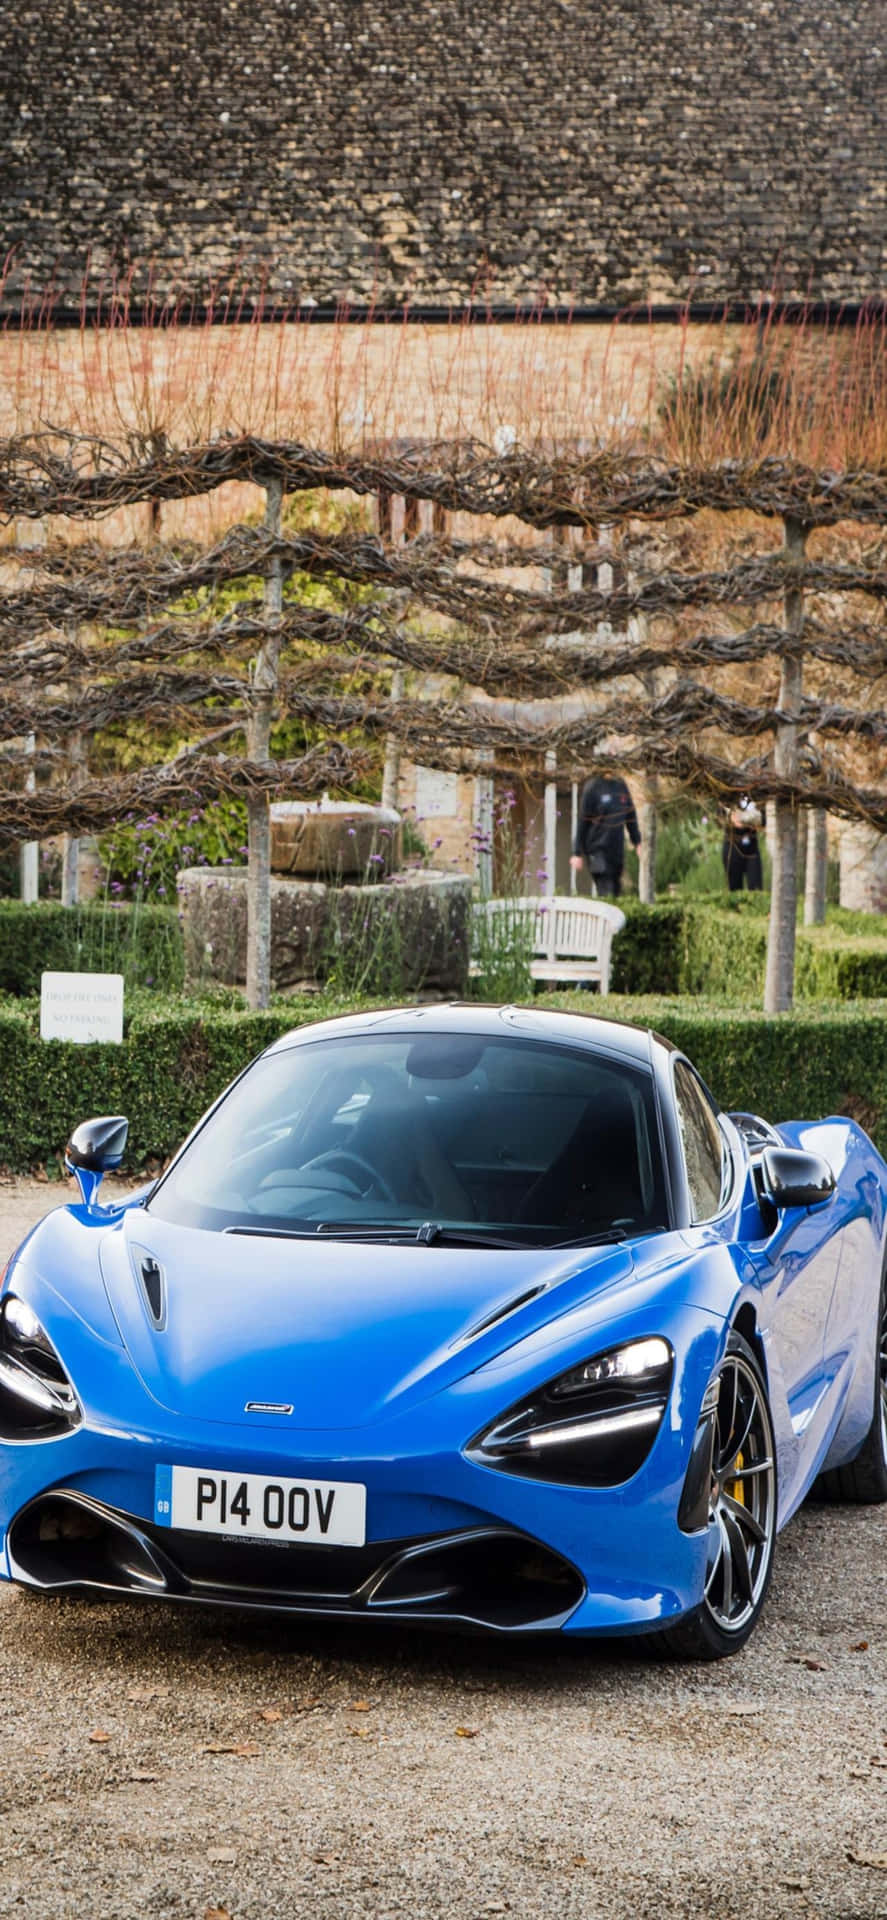 The Luxurious Combination of an Iphone Xs and a McLaren 720s